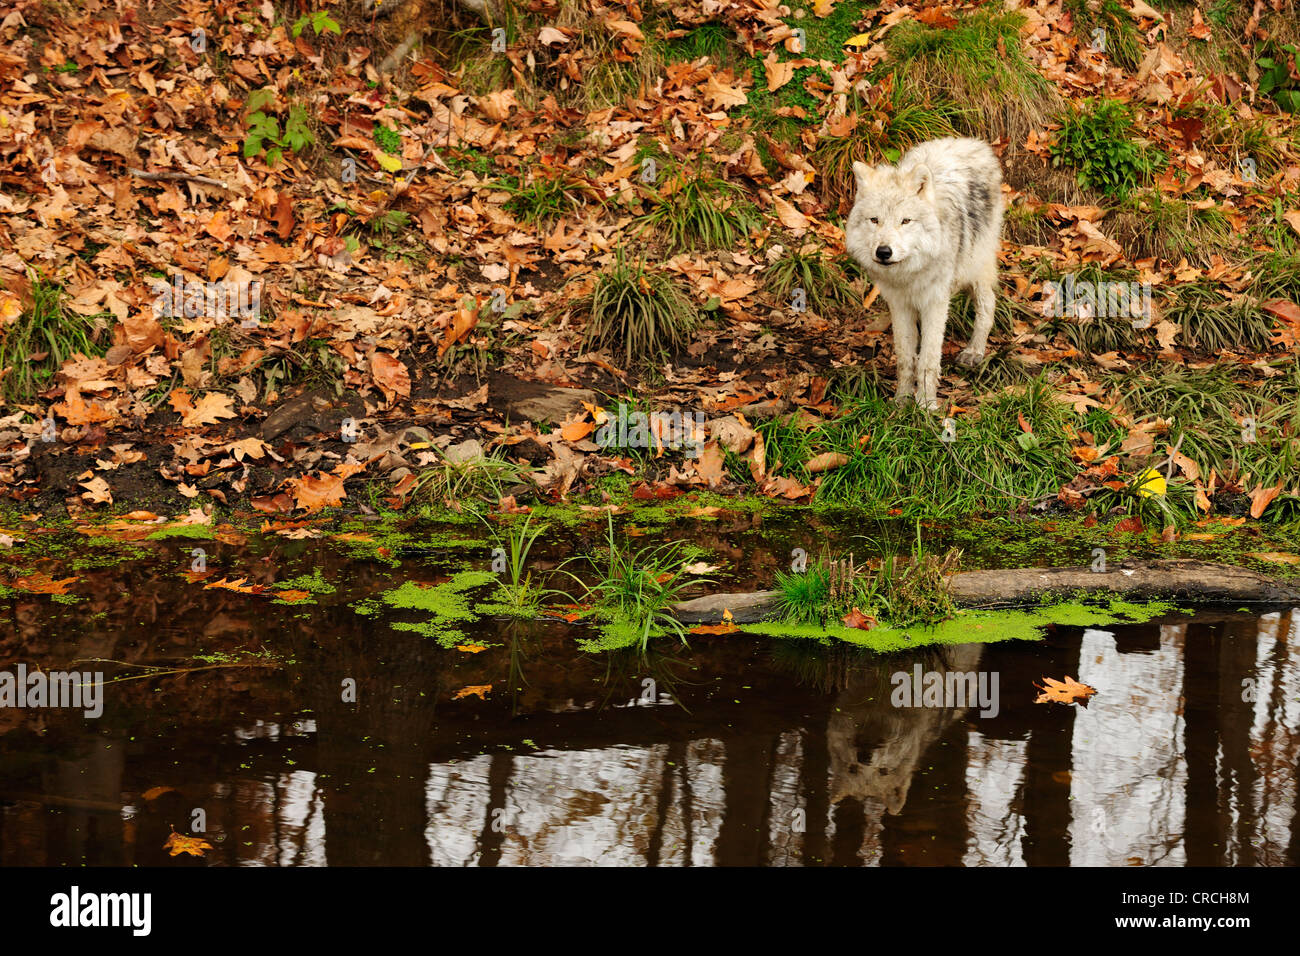 Polar Wolf, White Wolf or Arctic Wolf (Canis lupus arctos) at a pond, reflected in the water, Canada Stock Photo